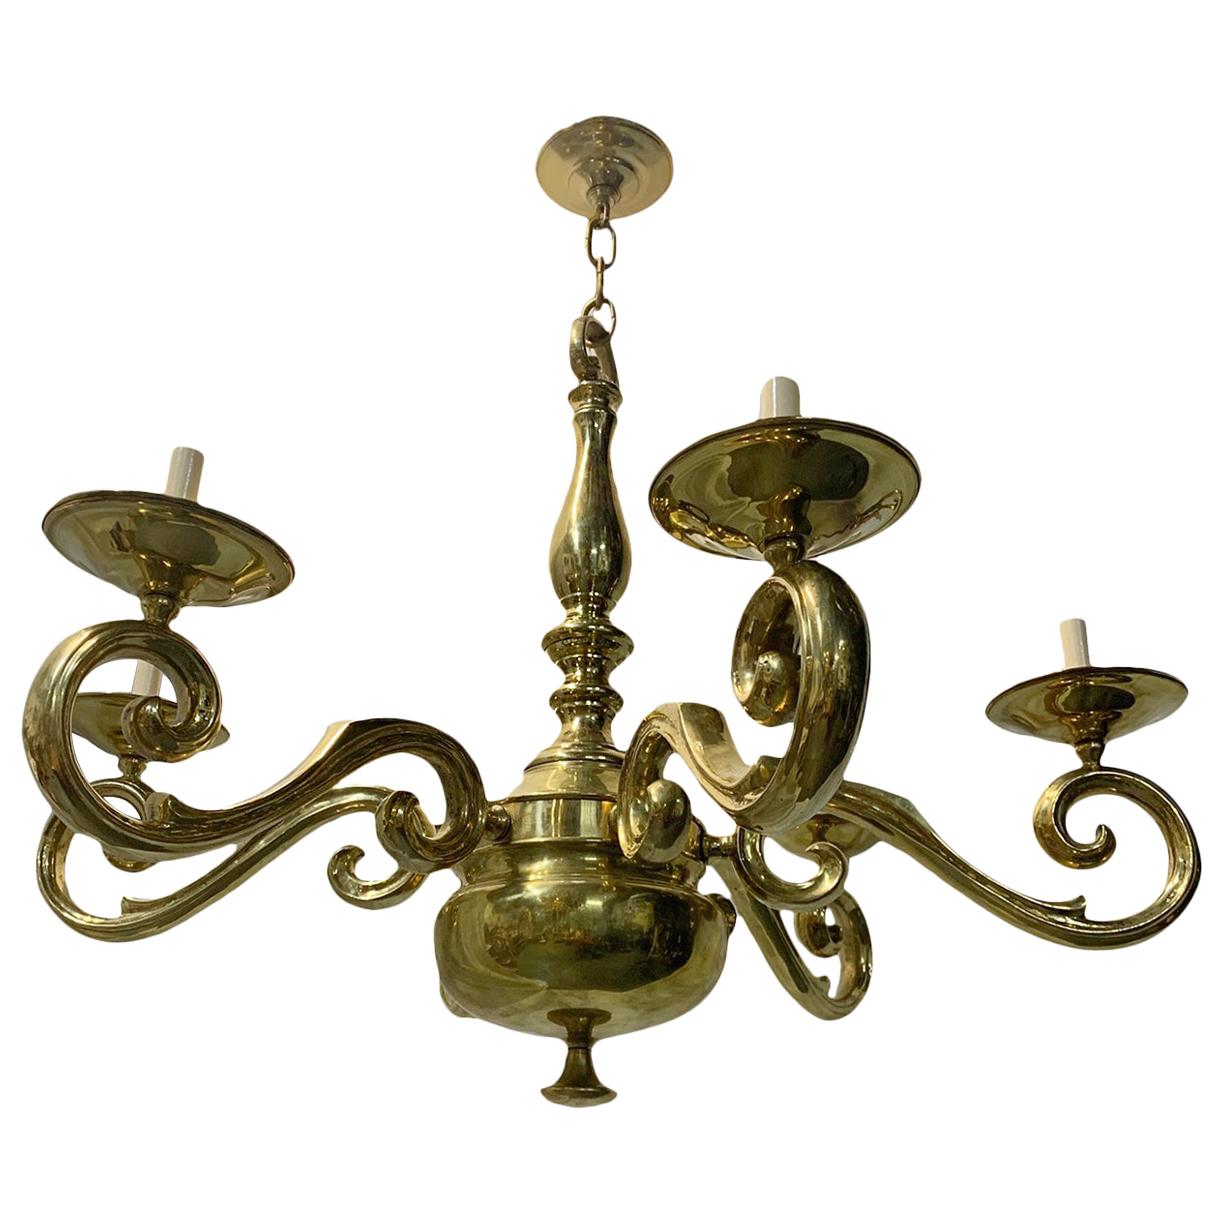 Set of French Polished Bronze Chandeliers, Sold Individually